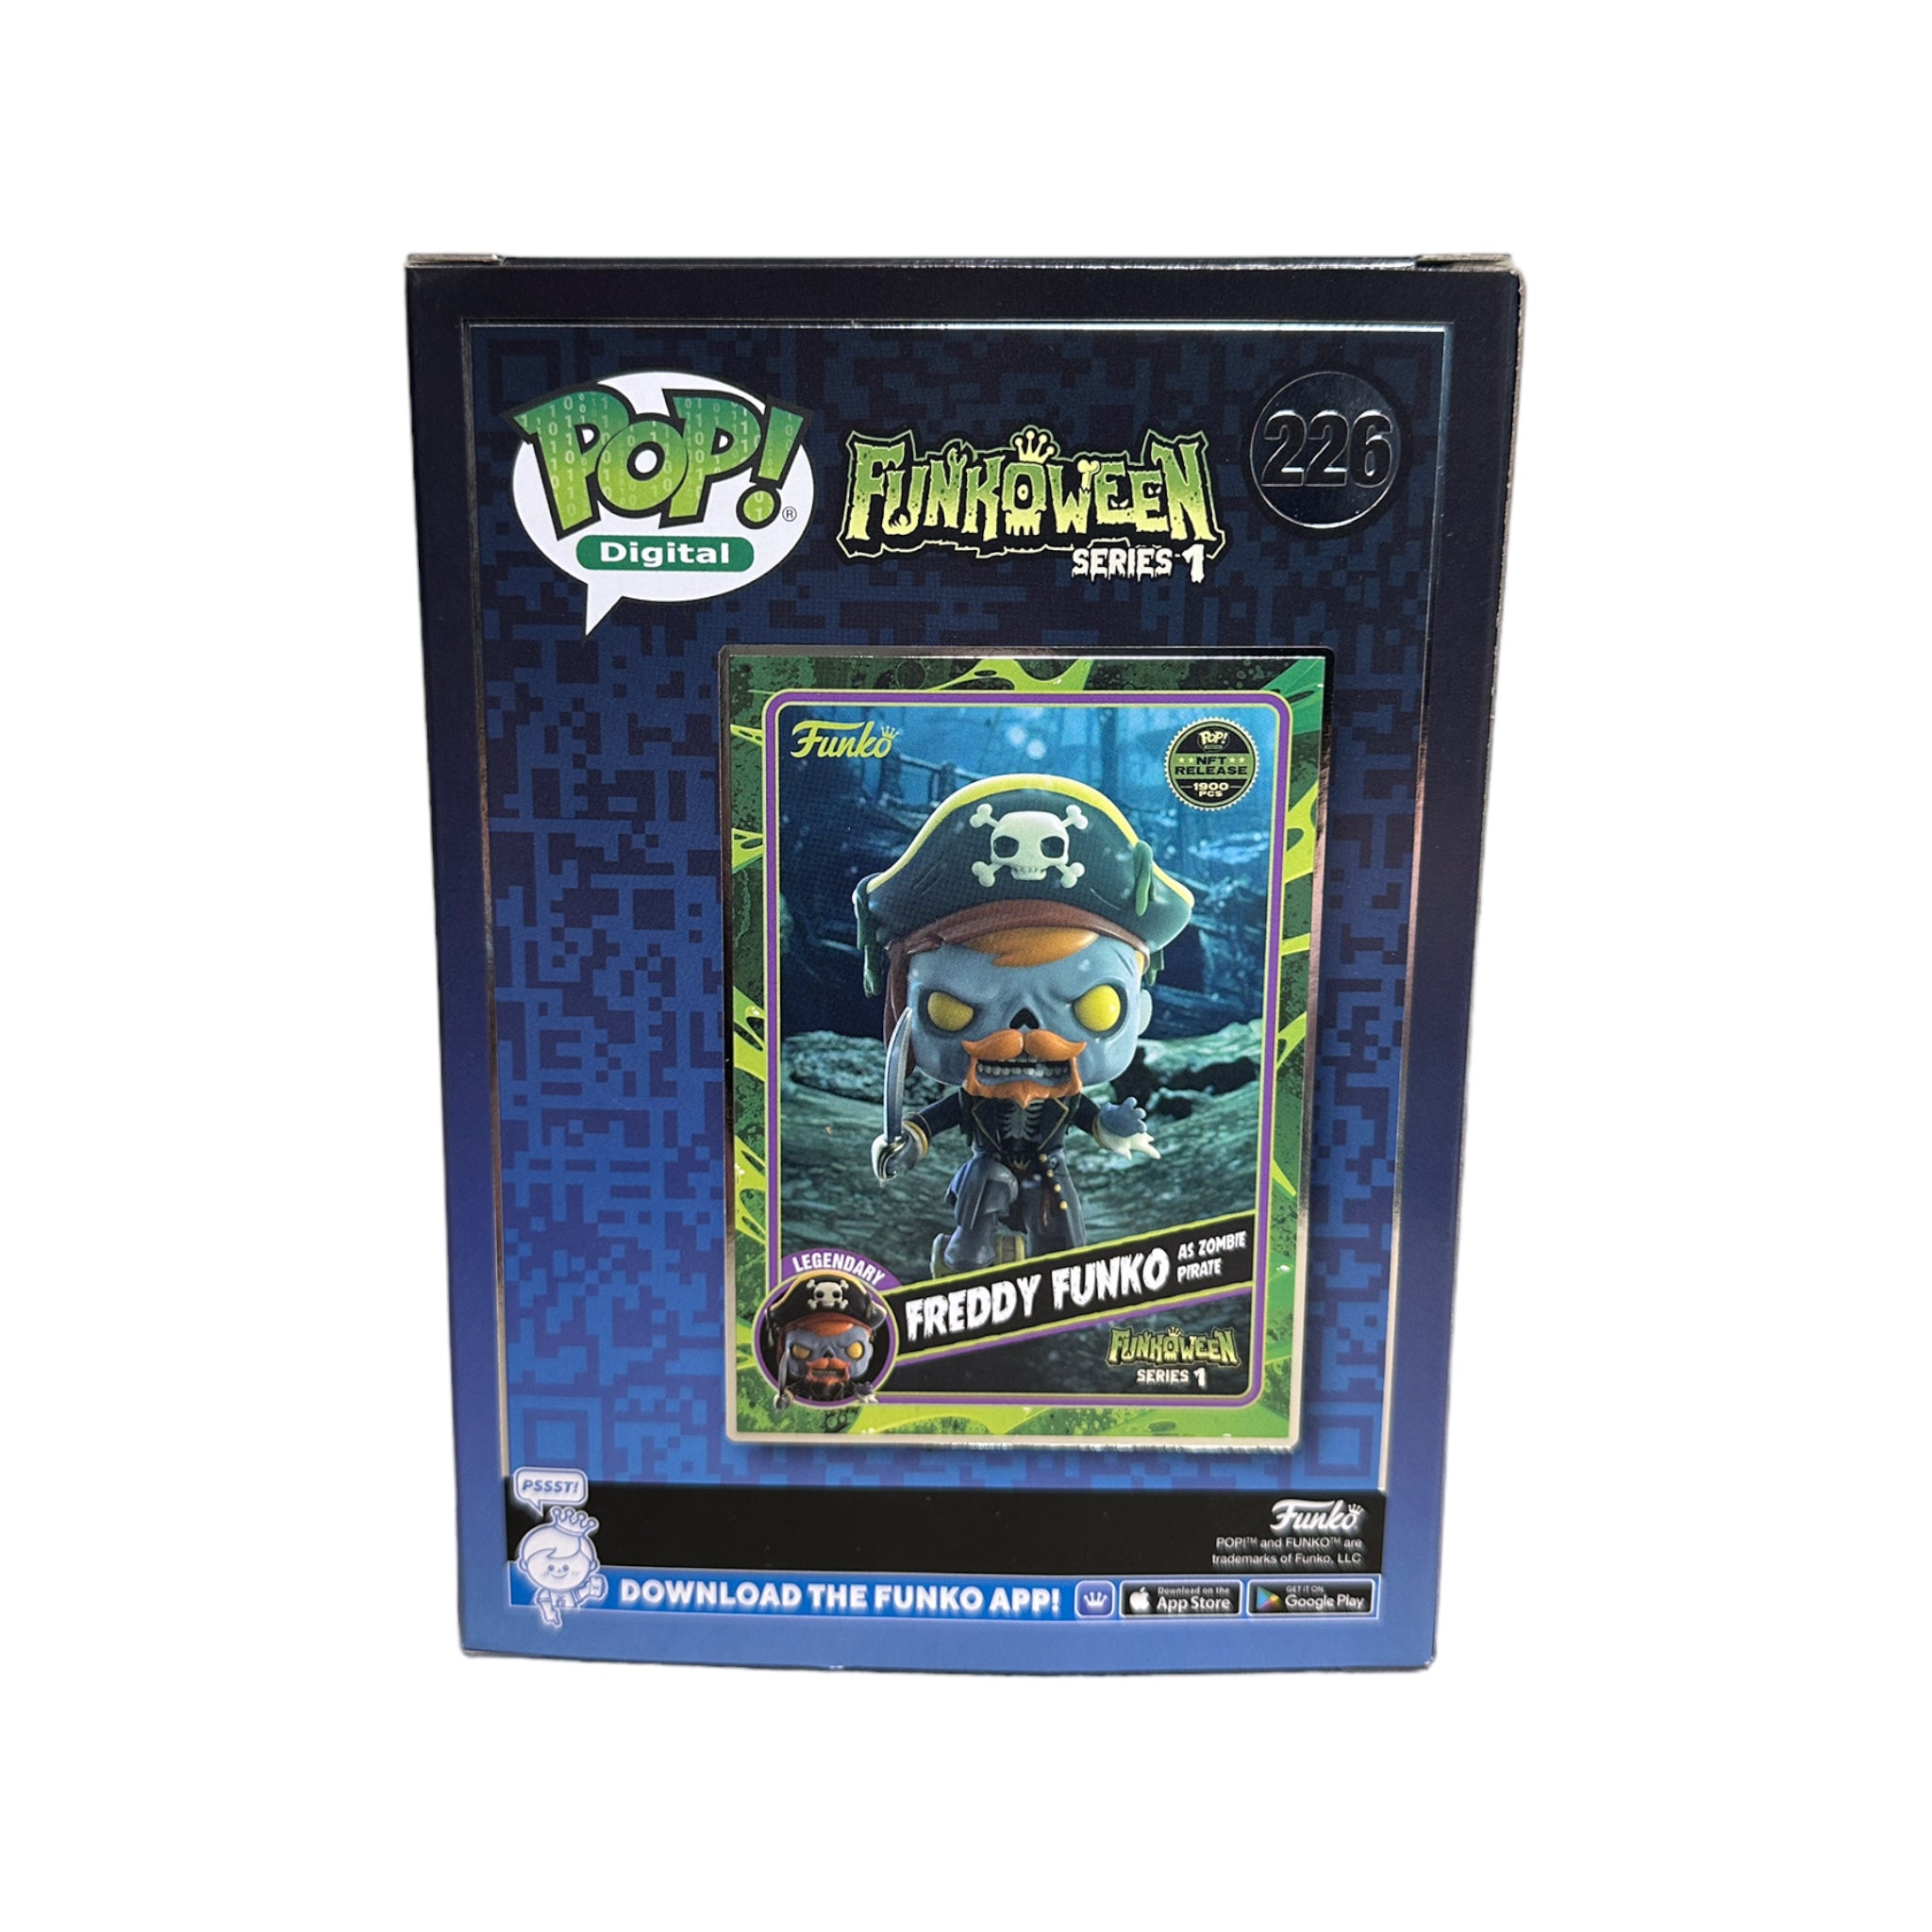 Freddy Funko as Zombie Pirate #226 (Glows in the Dark) Funko Pop! - Funkoween Series 1 - NFT Release Exclusive LE1900 Pcs - Condition 8/10